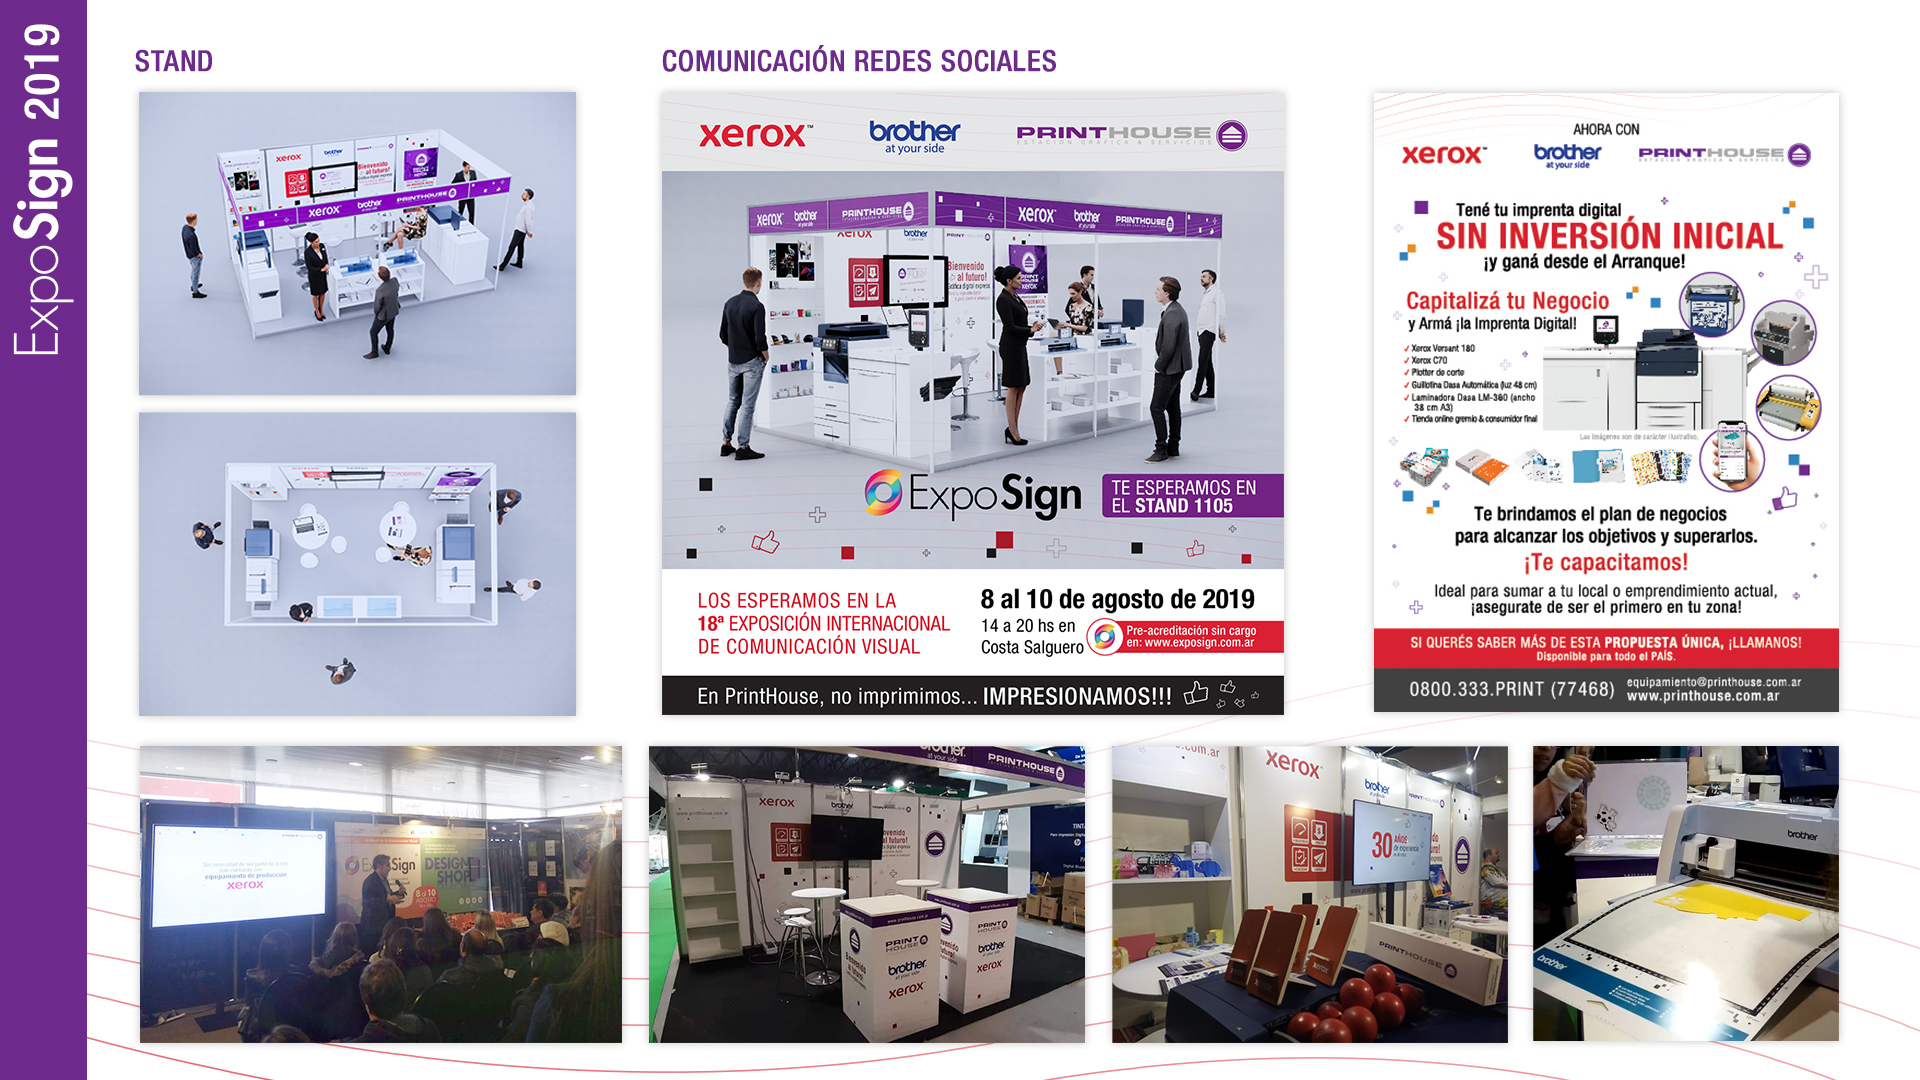 Exposign 2019 - Nuestro Stand PrintHouse_Xerox_Brother